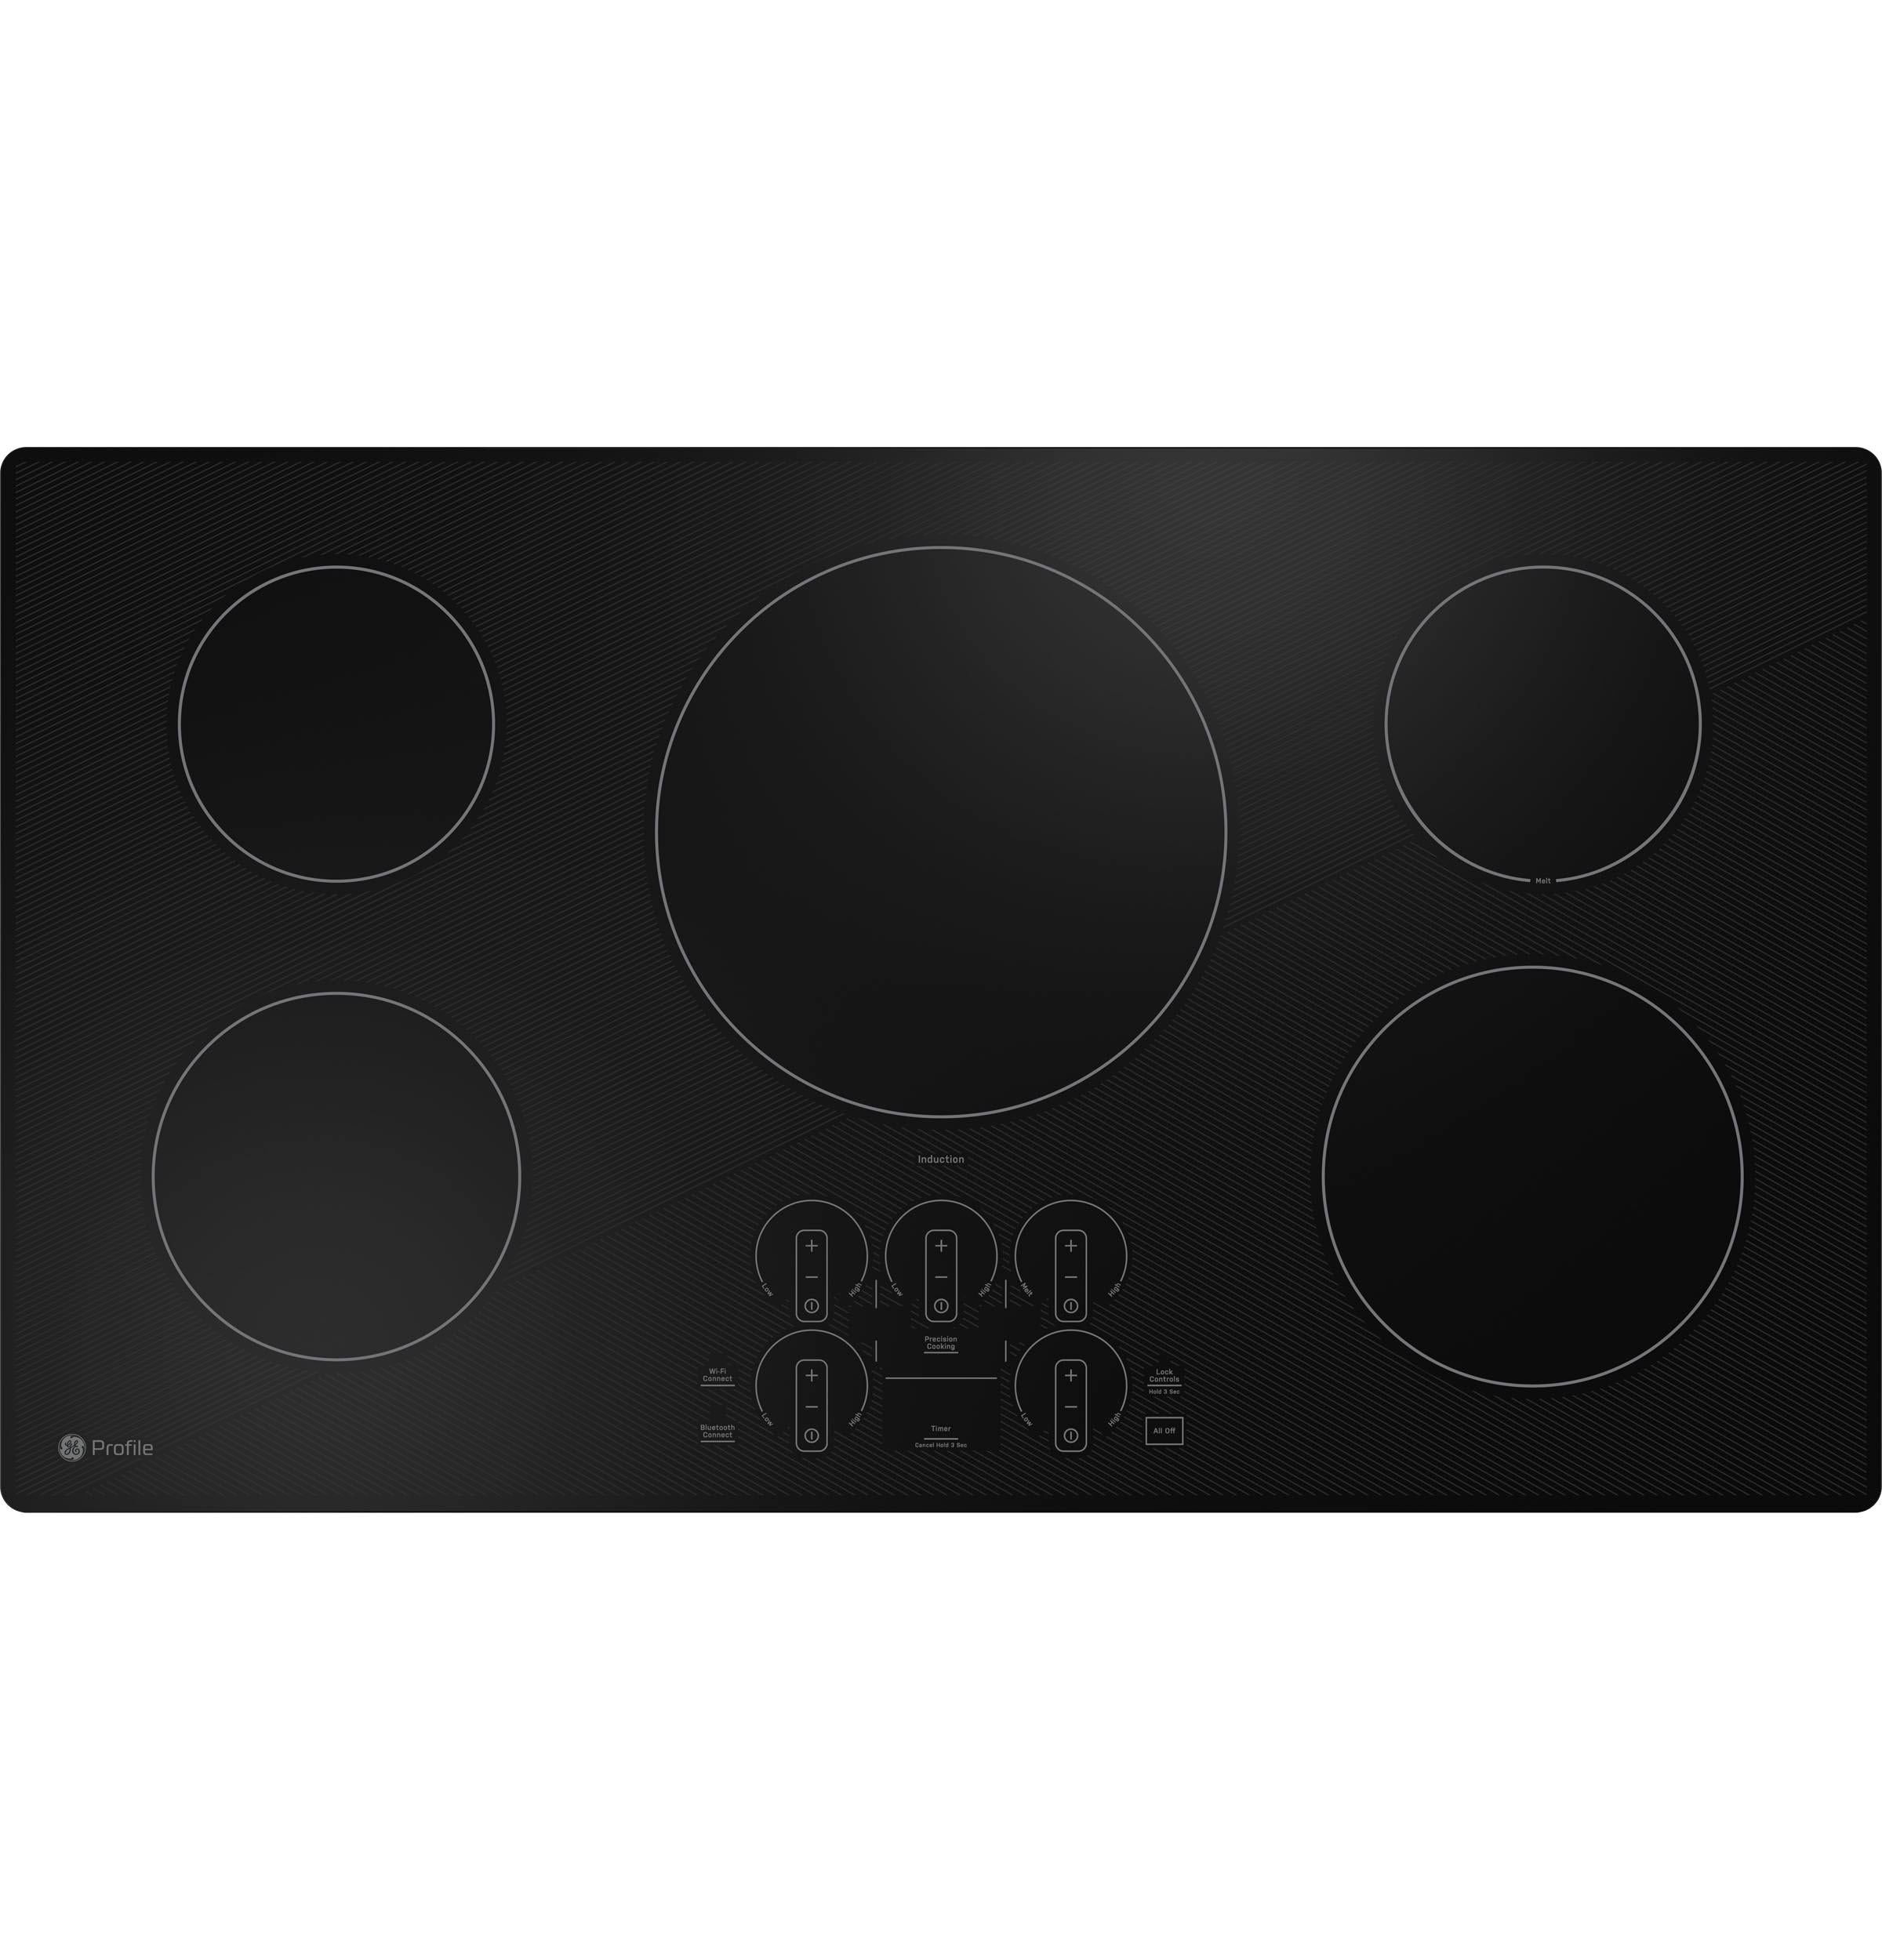 Choosing Cookware for Induction Cooktops - THOR Kitchen